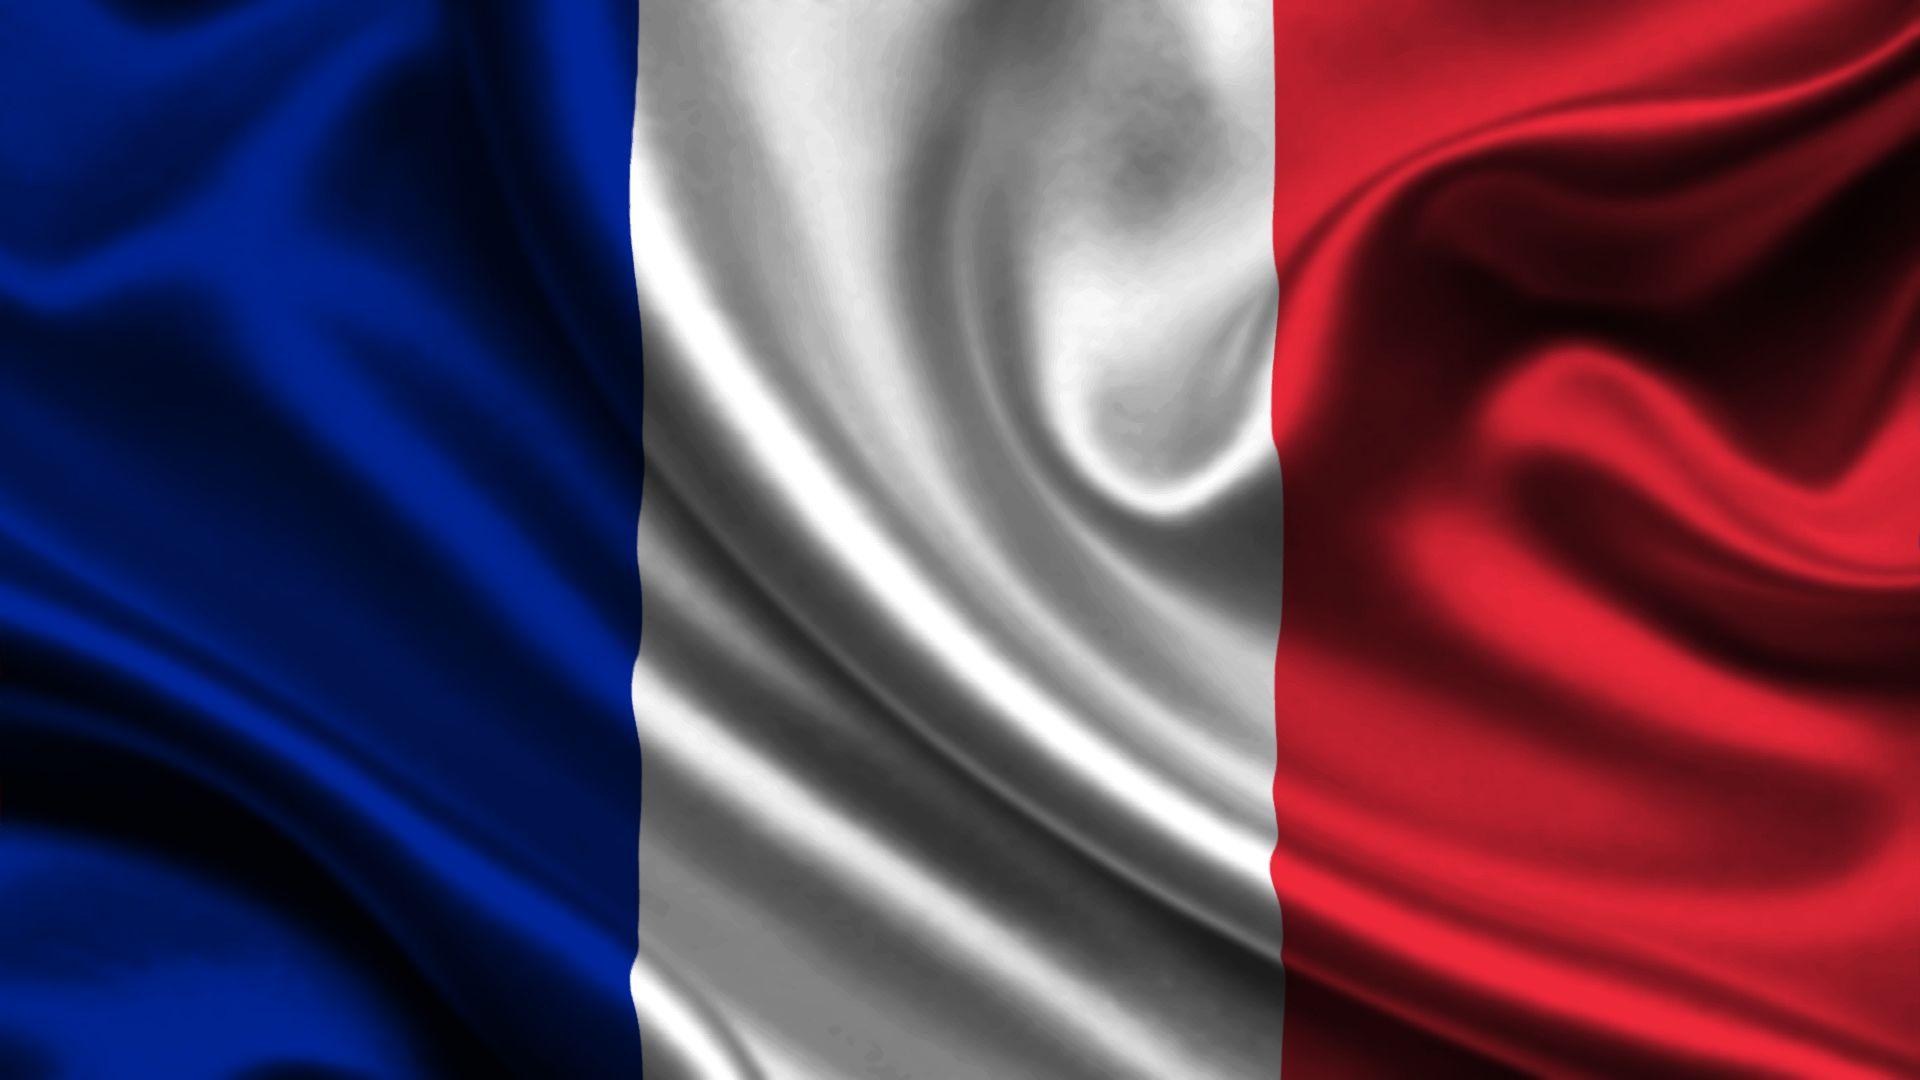 France Flag Images, 400+ Free French Flag Images & Wallpapers in HD -  Pixabay